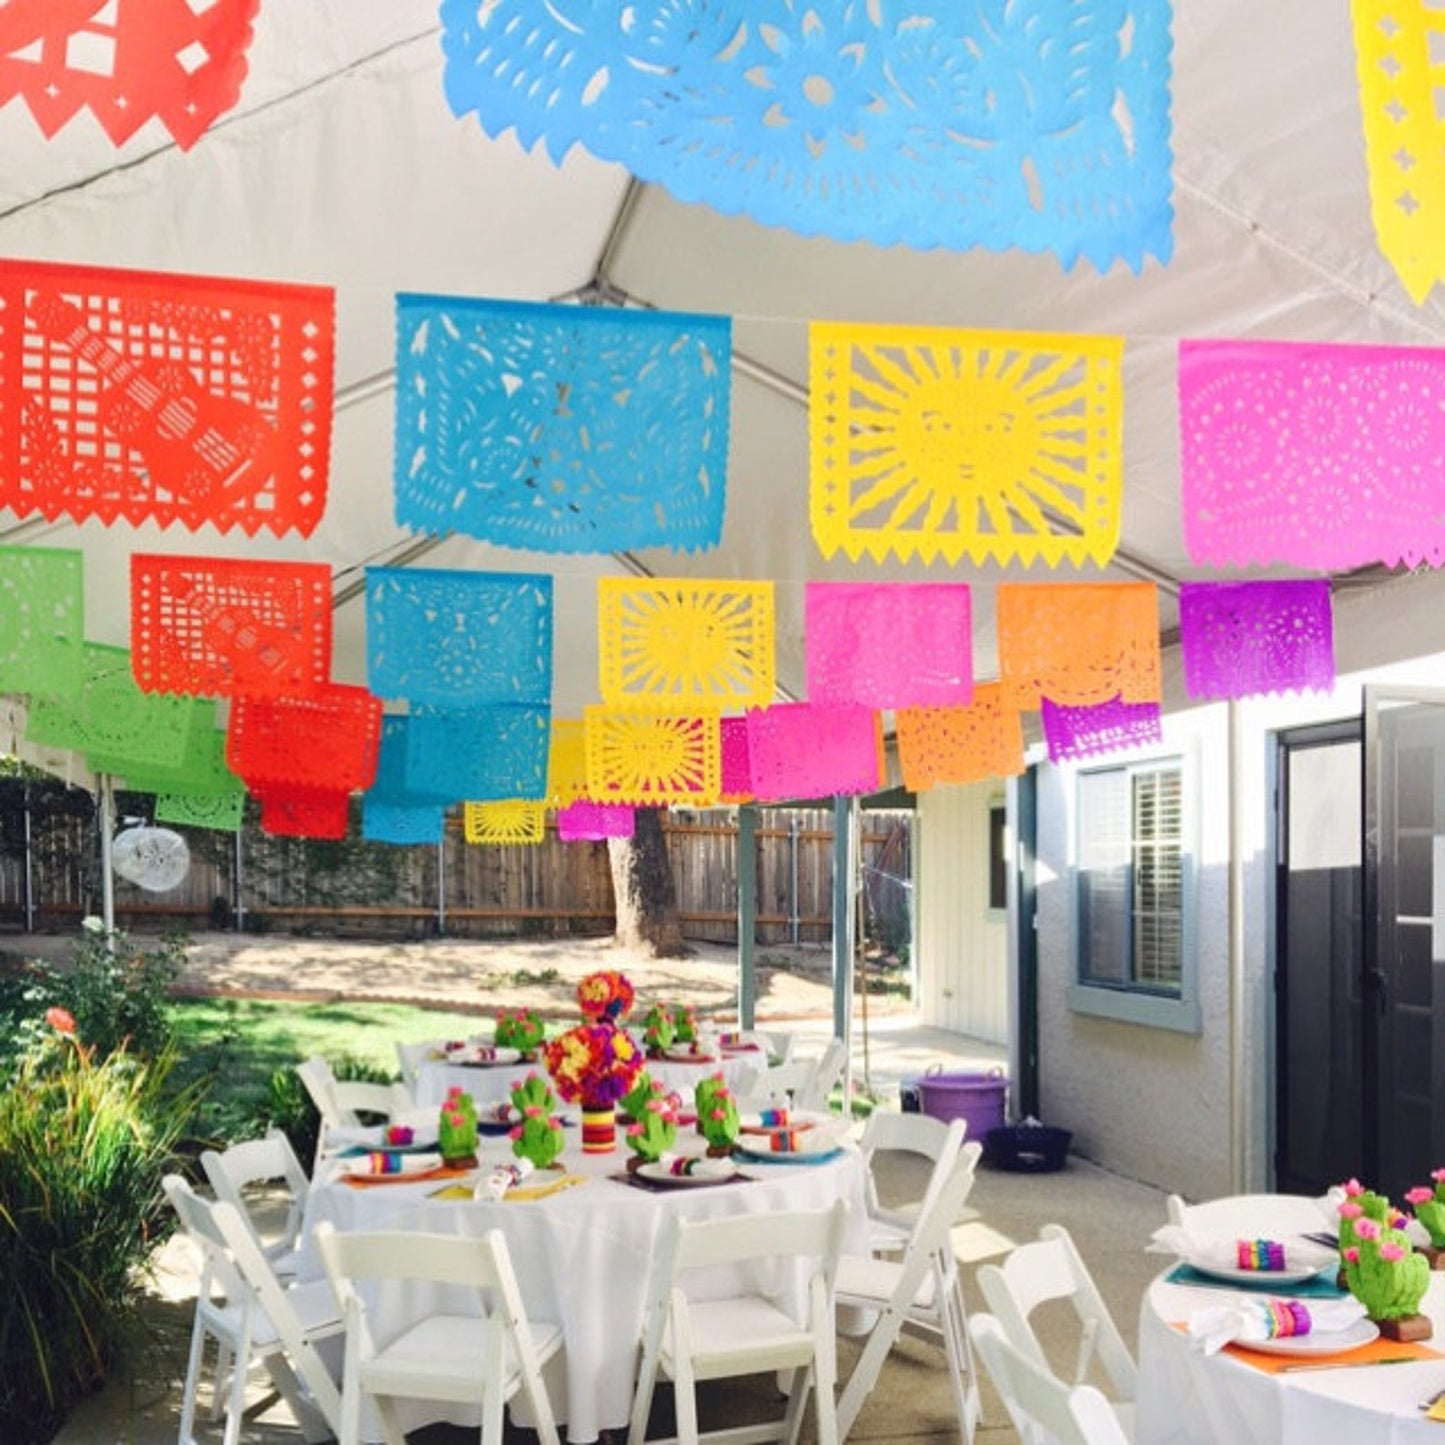 All Occasion and Wedding Decorations, Papel Picado Banners, Wedding garlands, Wedding banners, Fiesta Bridal Shower, Rehearsal Dinner, Wedding bunting